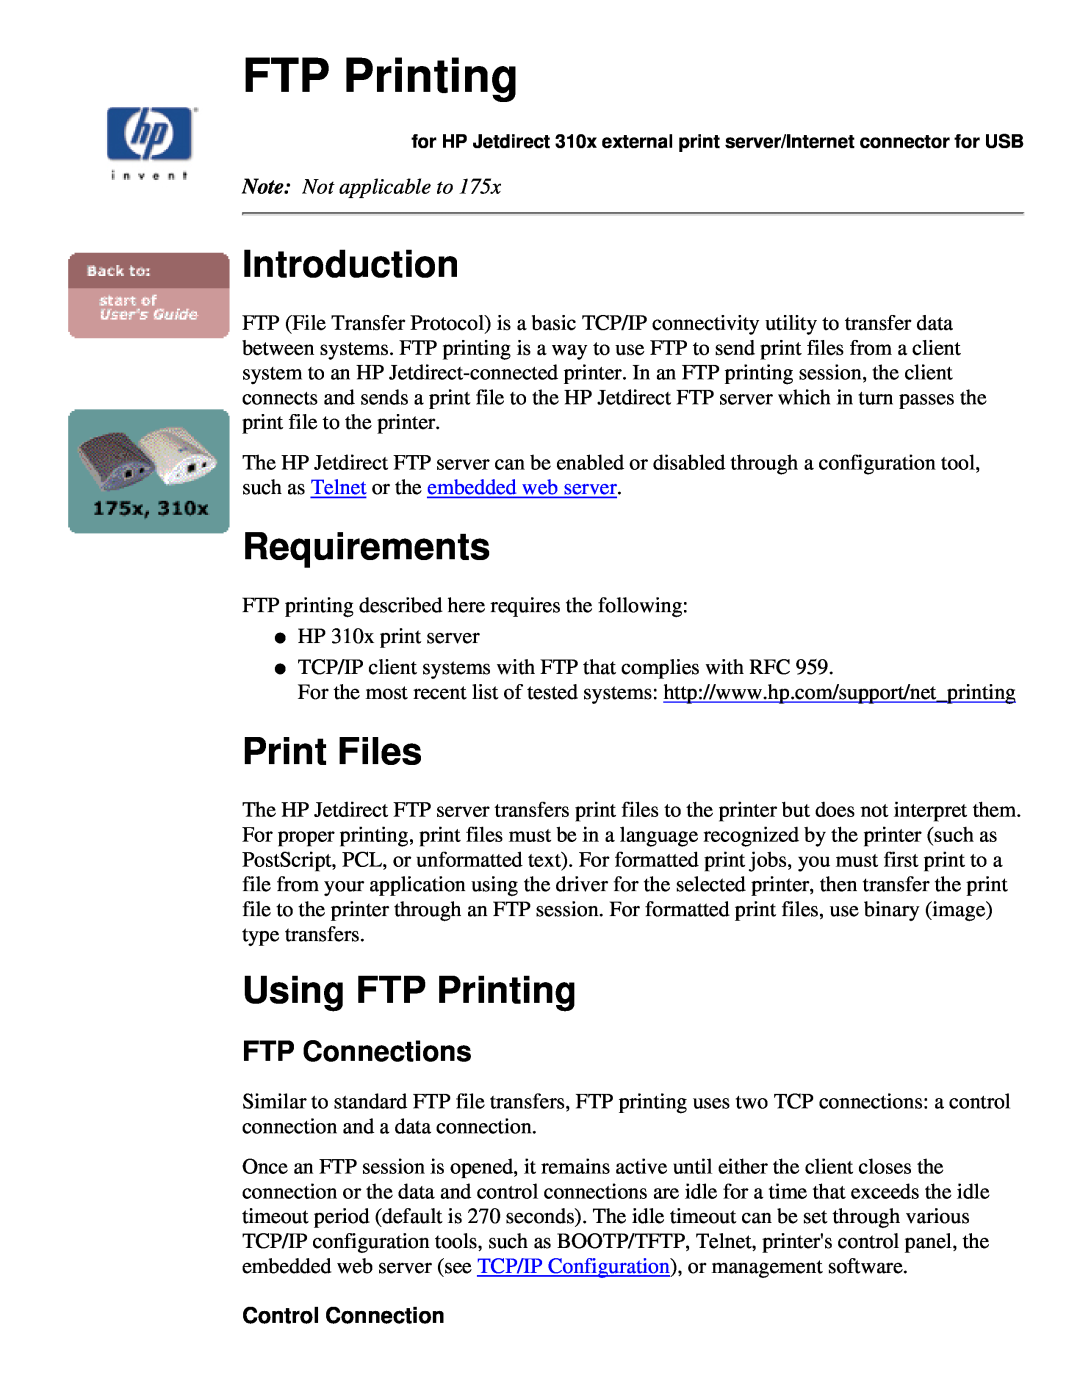 HP 175X, 310X Introduction, Requirements, Print Files, Using FTP Printing, FTP Connections, Note Not applicable to 